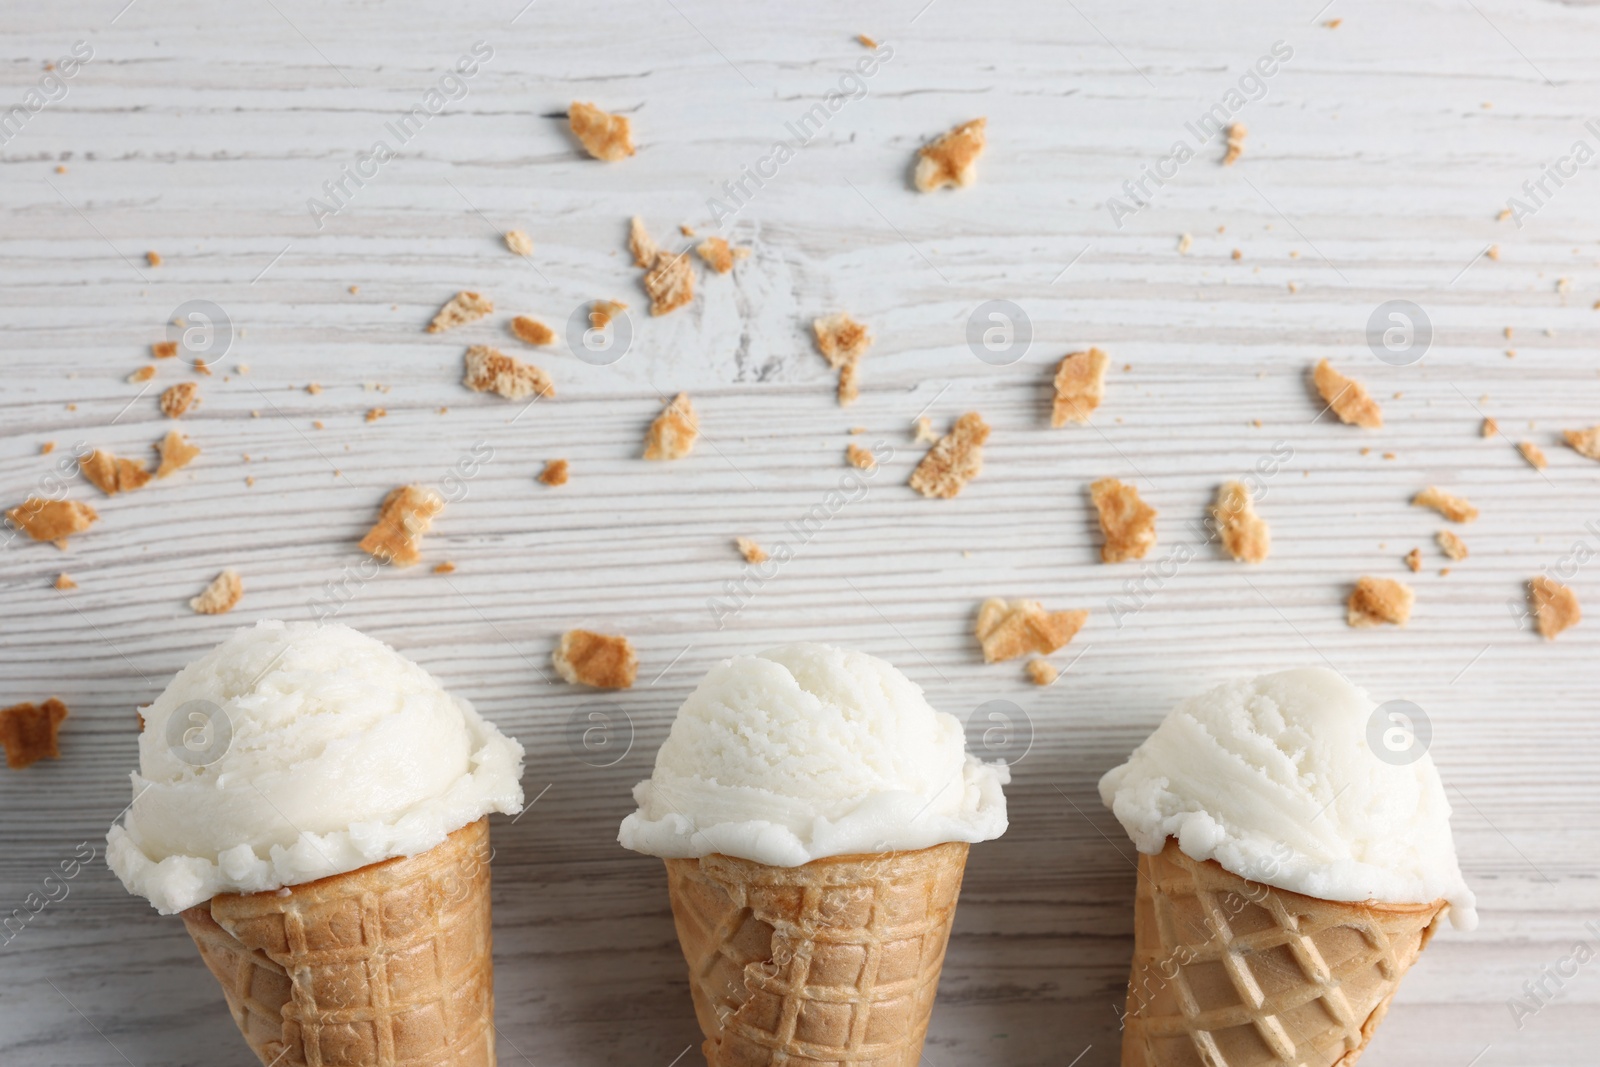 Photo of Ice cream scoops in wafer cones on light wooden table, flat lay